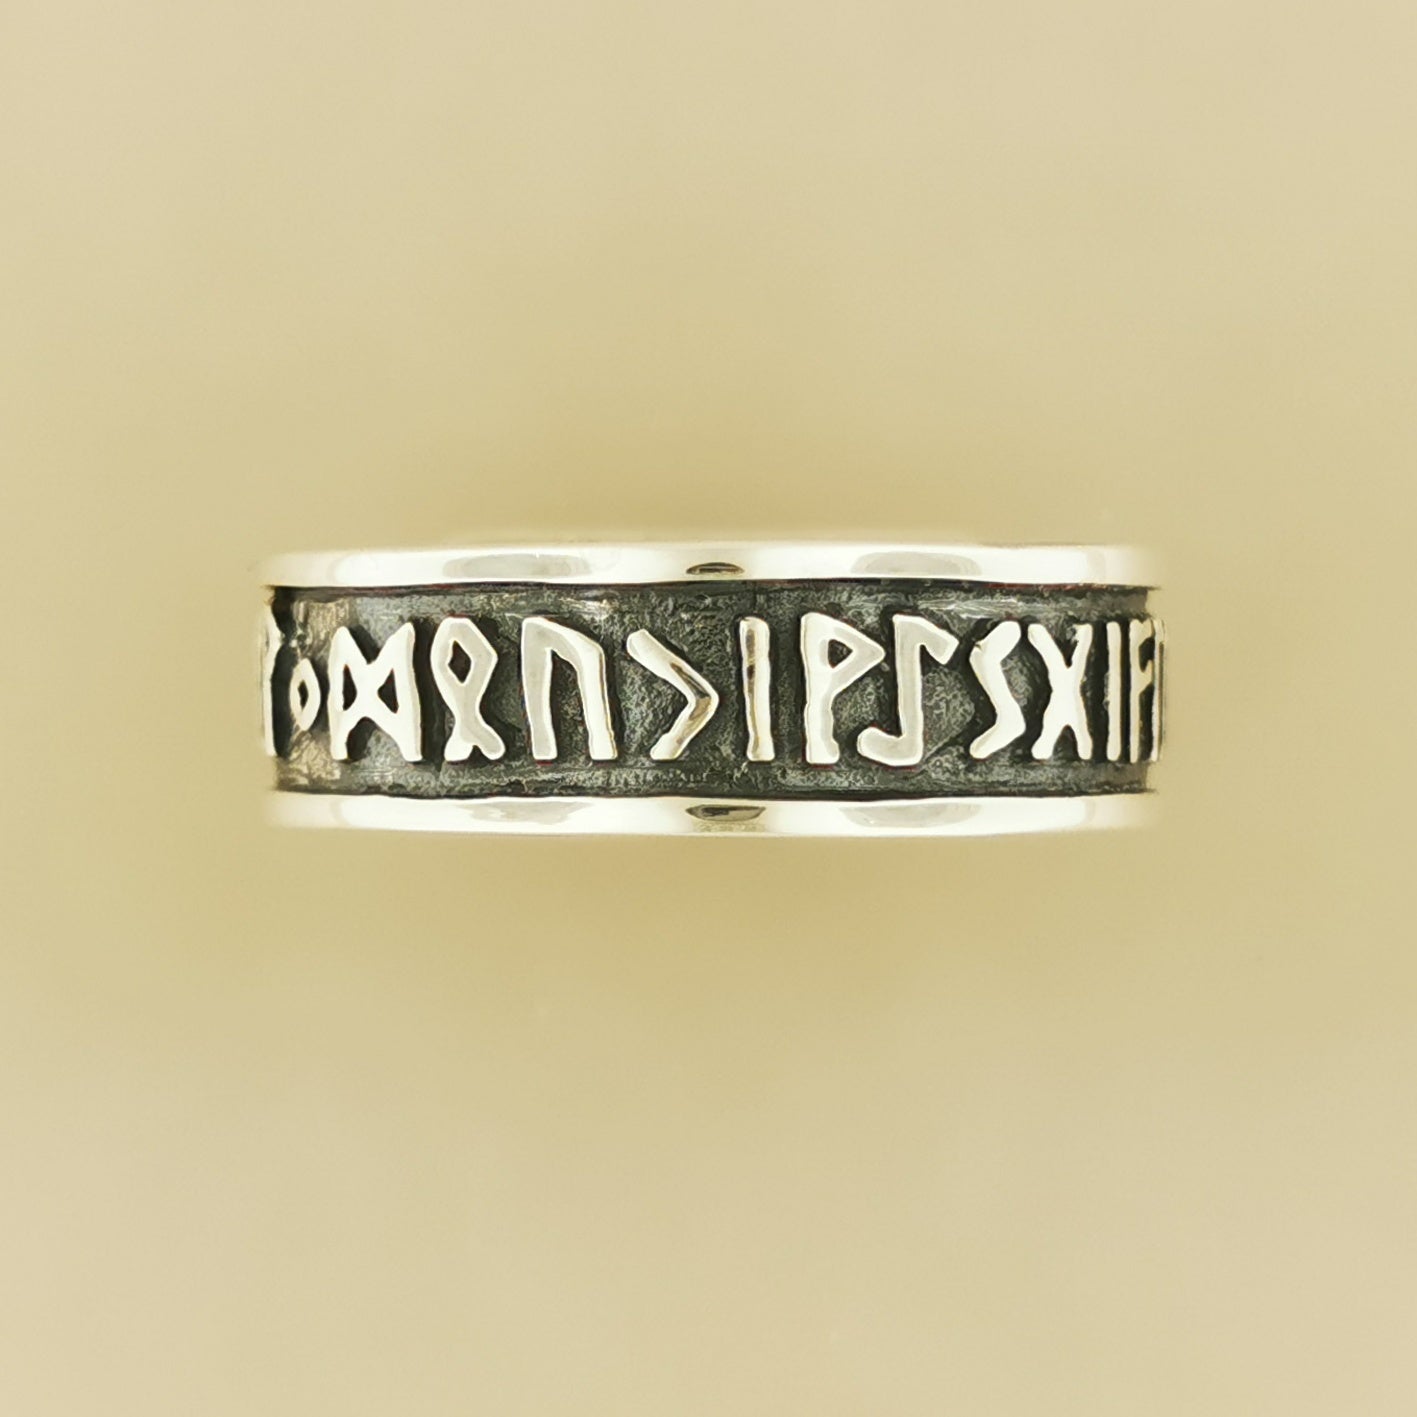 Norse Rune Band in Sterling Silver or Antique Bronze, Runic Alphabet Ring, Silver Viking Ring, 925 Rune Ring, 925 Silver Rune Ring, Sterling Silver Rune Band Ring, Viking Rune Ring, Nordic Silver Band, Elder Futhark Sterling Silver Ring